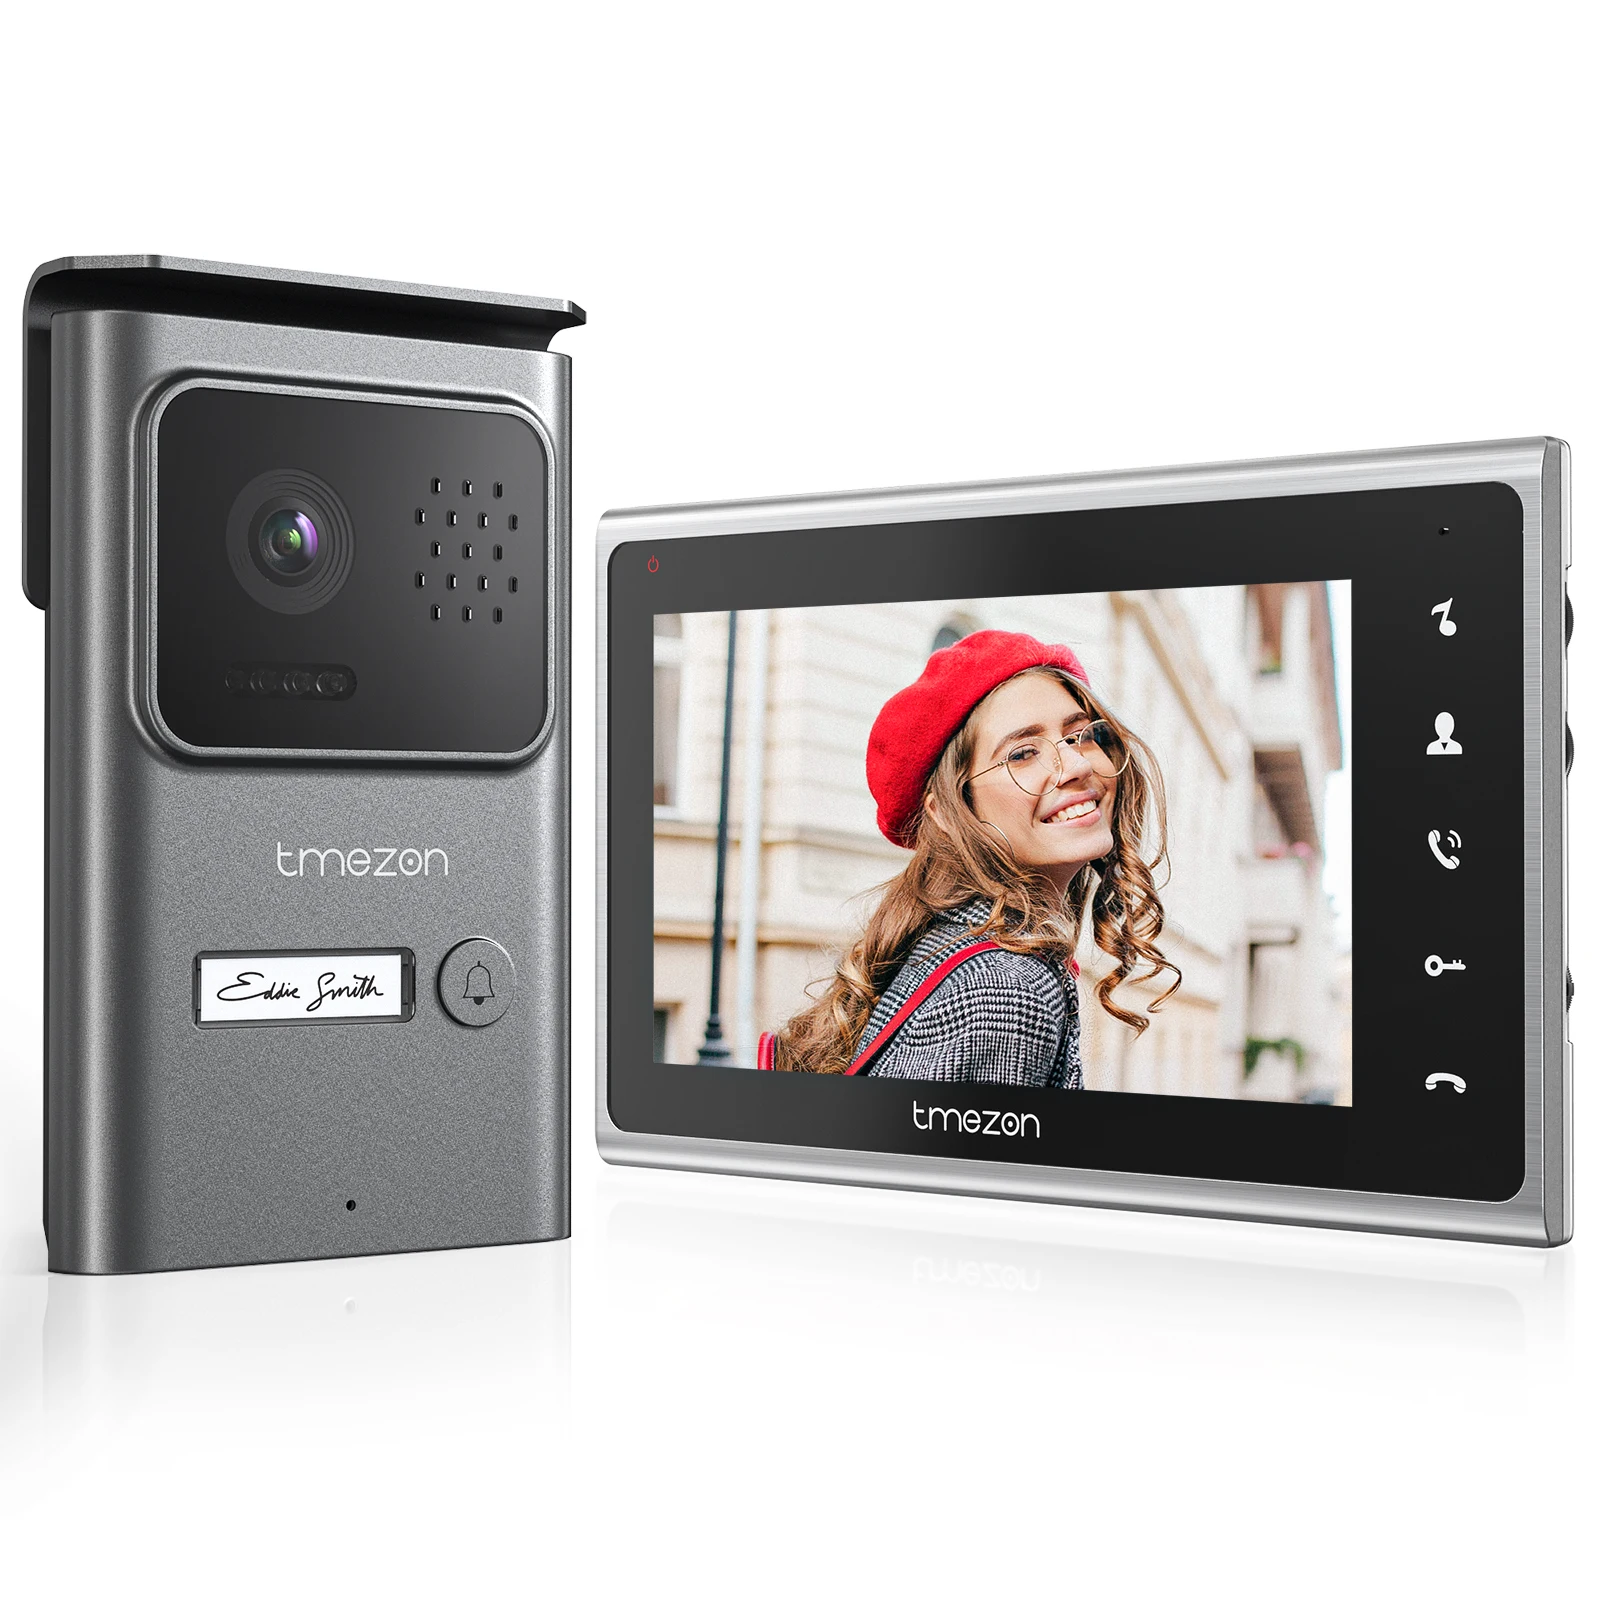 

TMEZON 2 wire video door phone doorbell intercom system,7 inch monitor with wired bell, touch button,snapshot/record